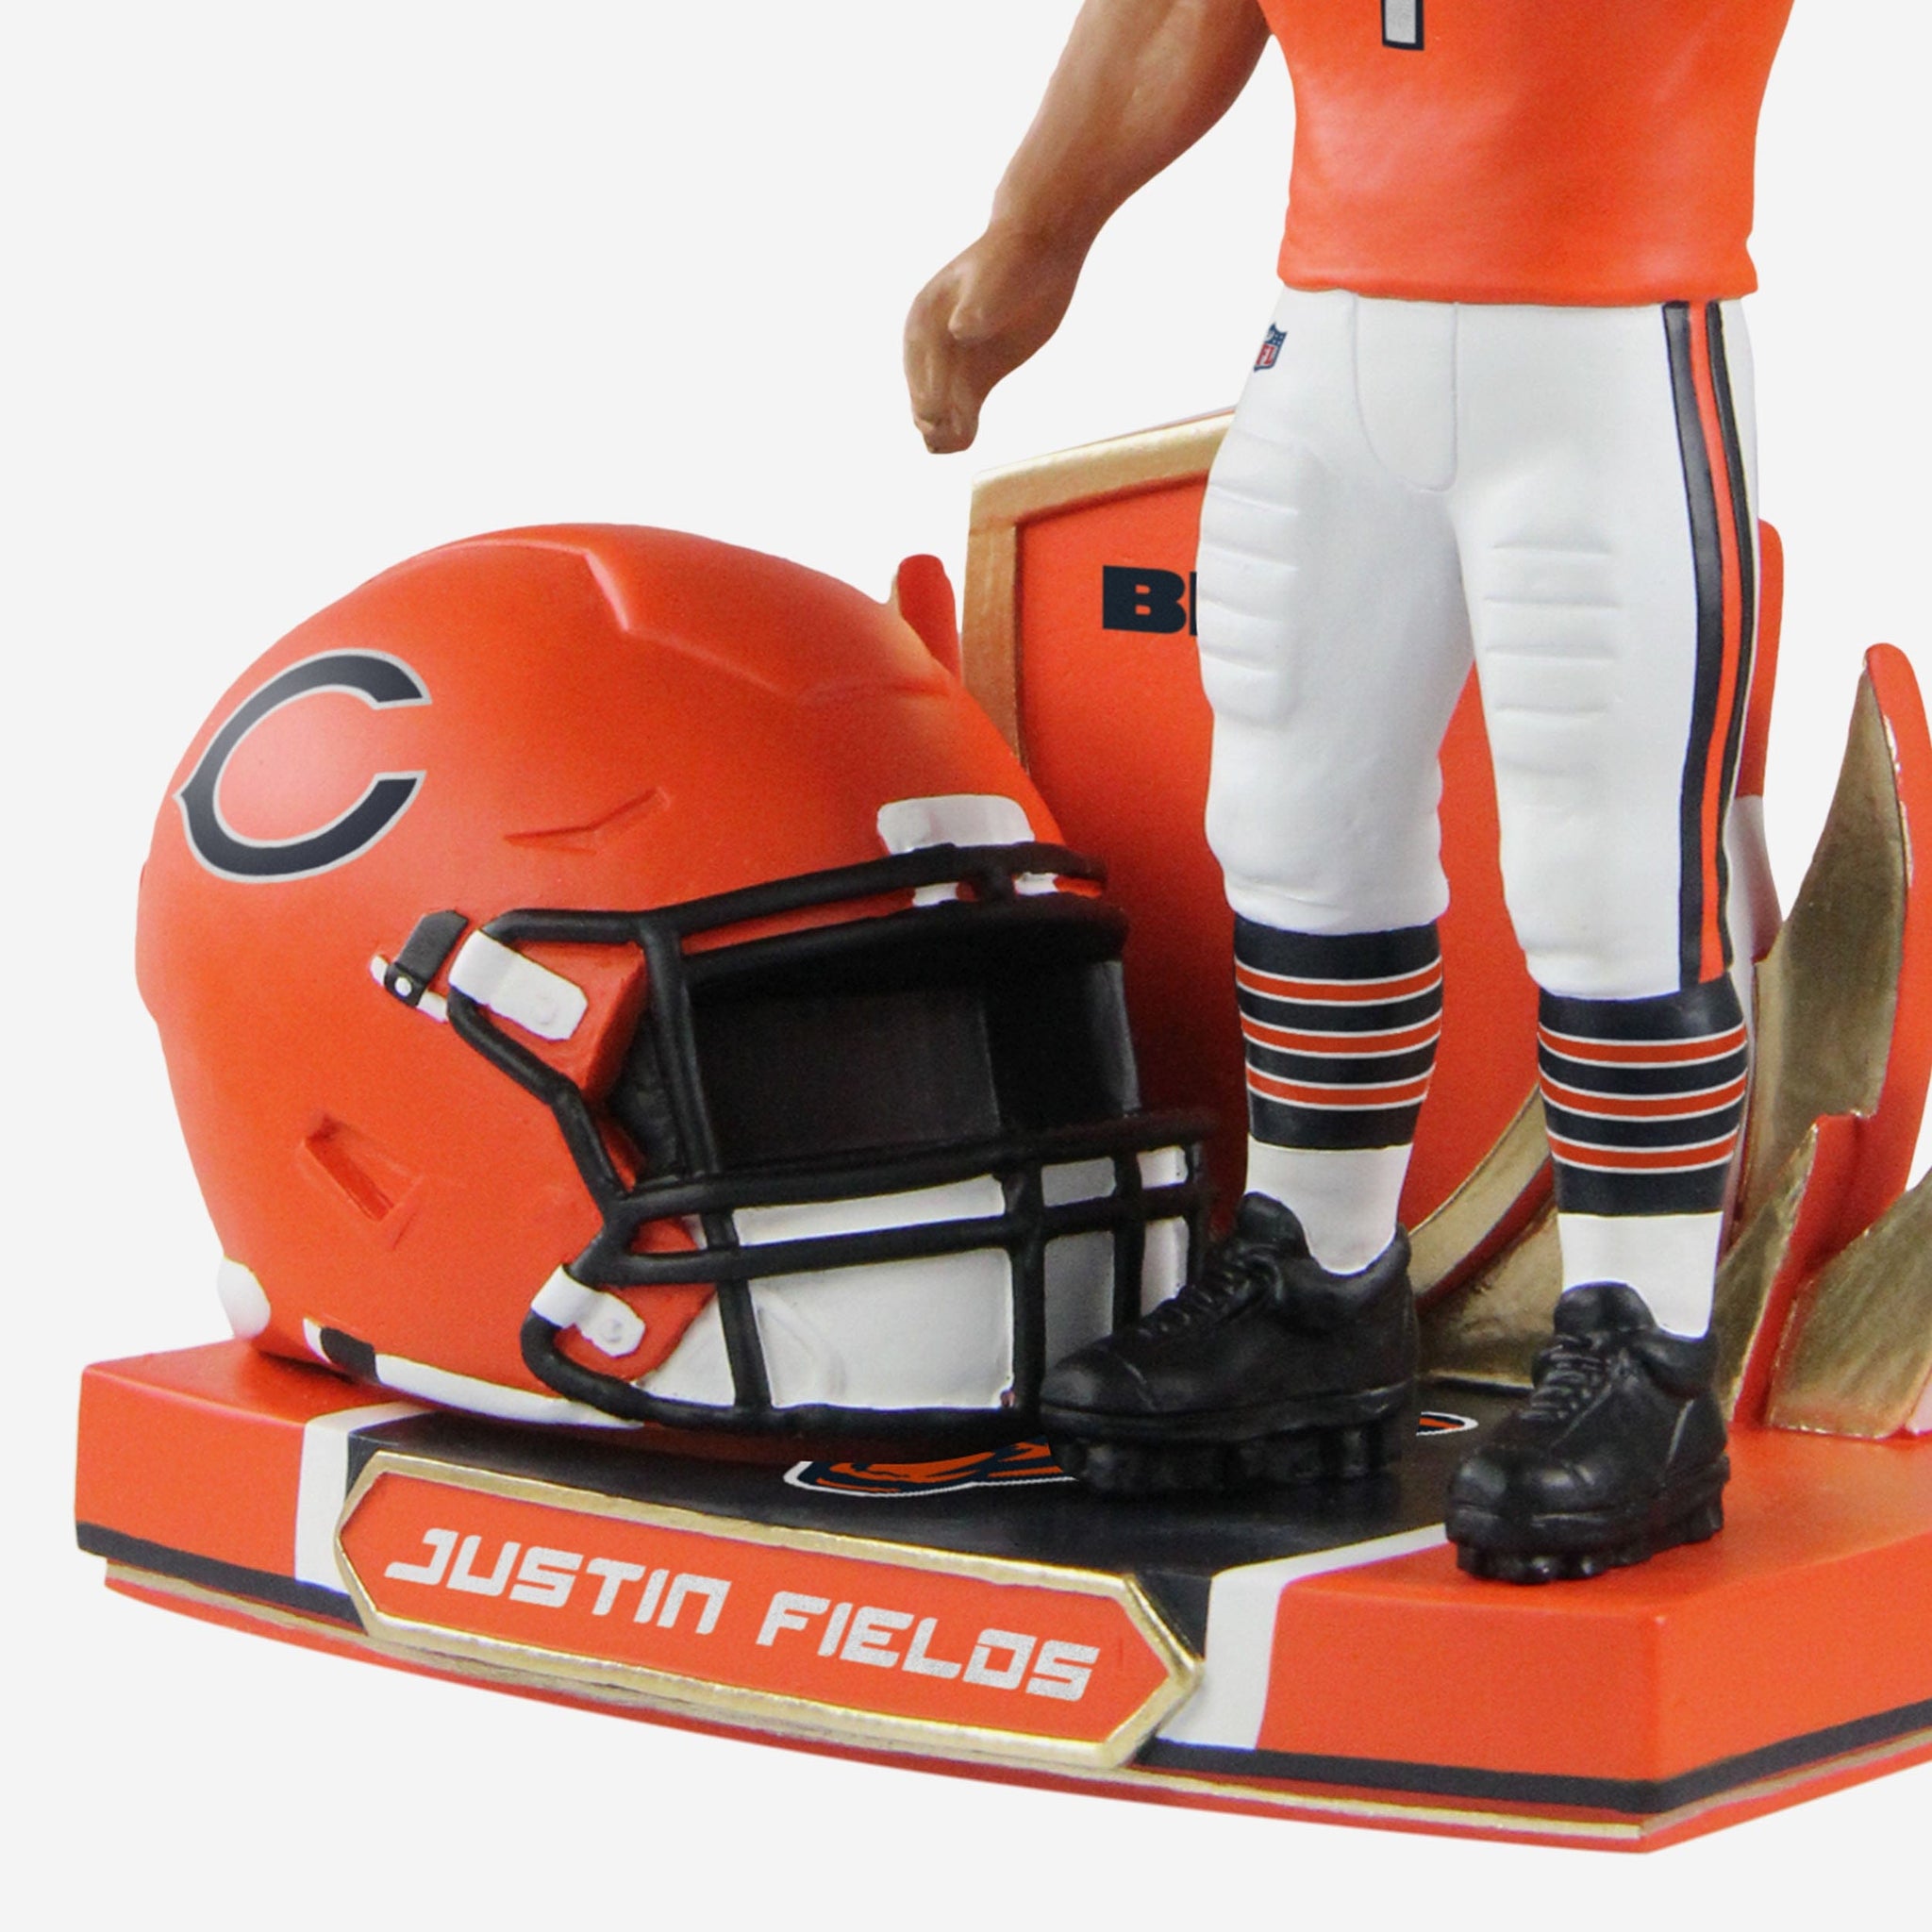 NFL Series 2 Chicago Bears Justin Fields Action Figure